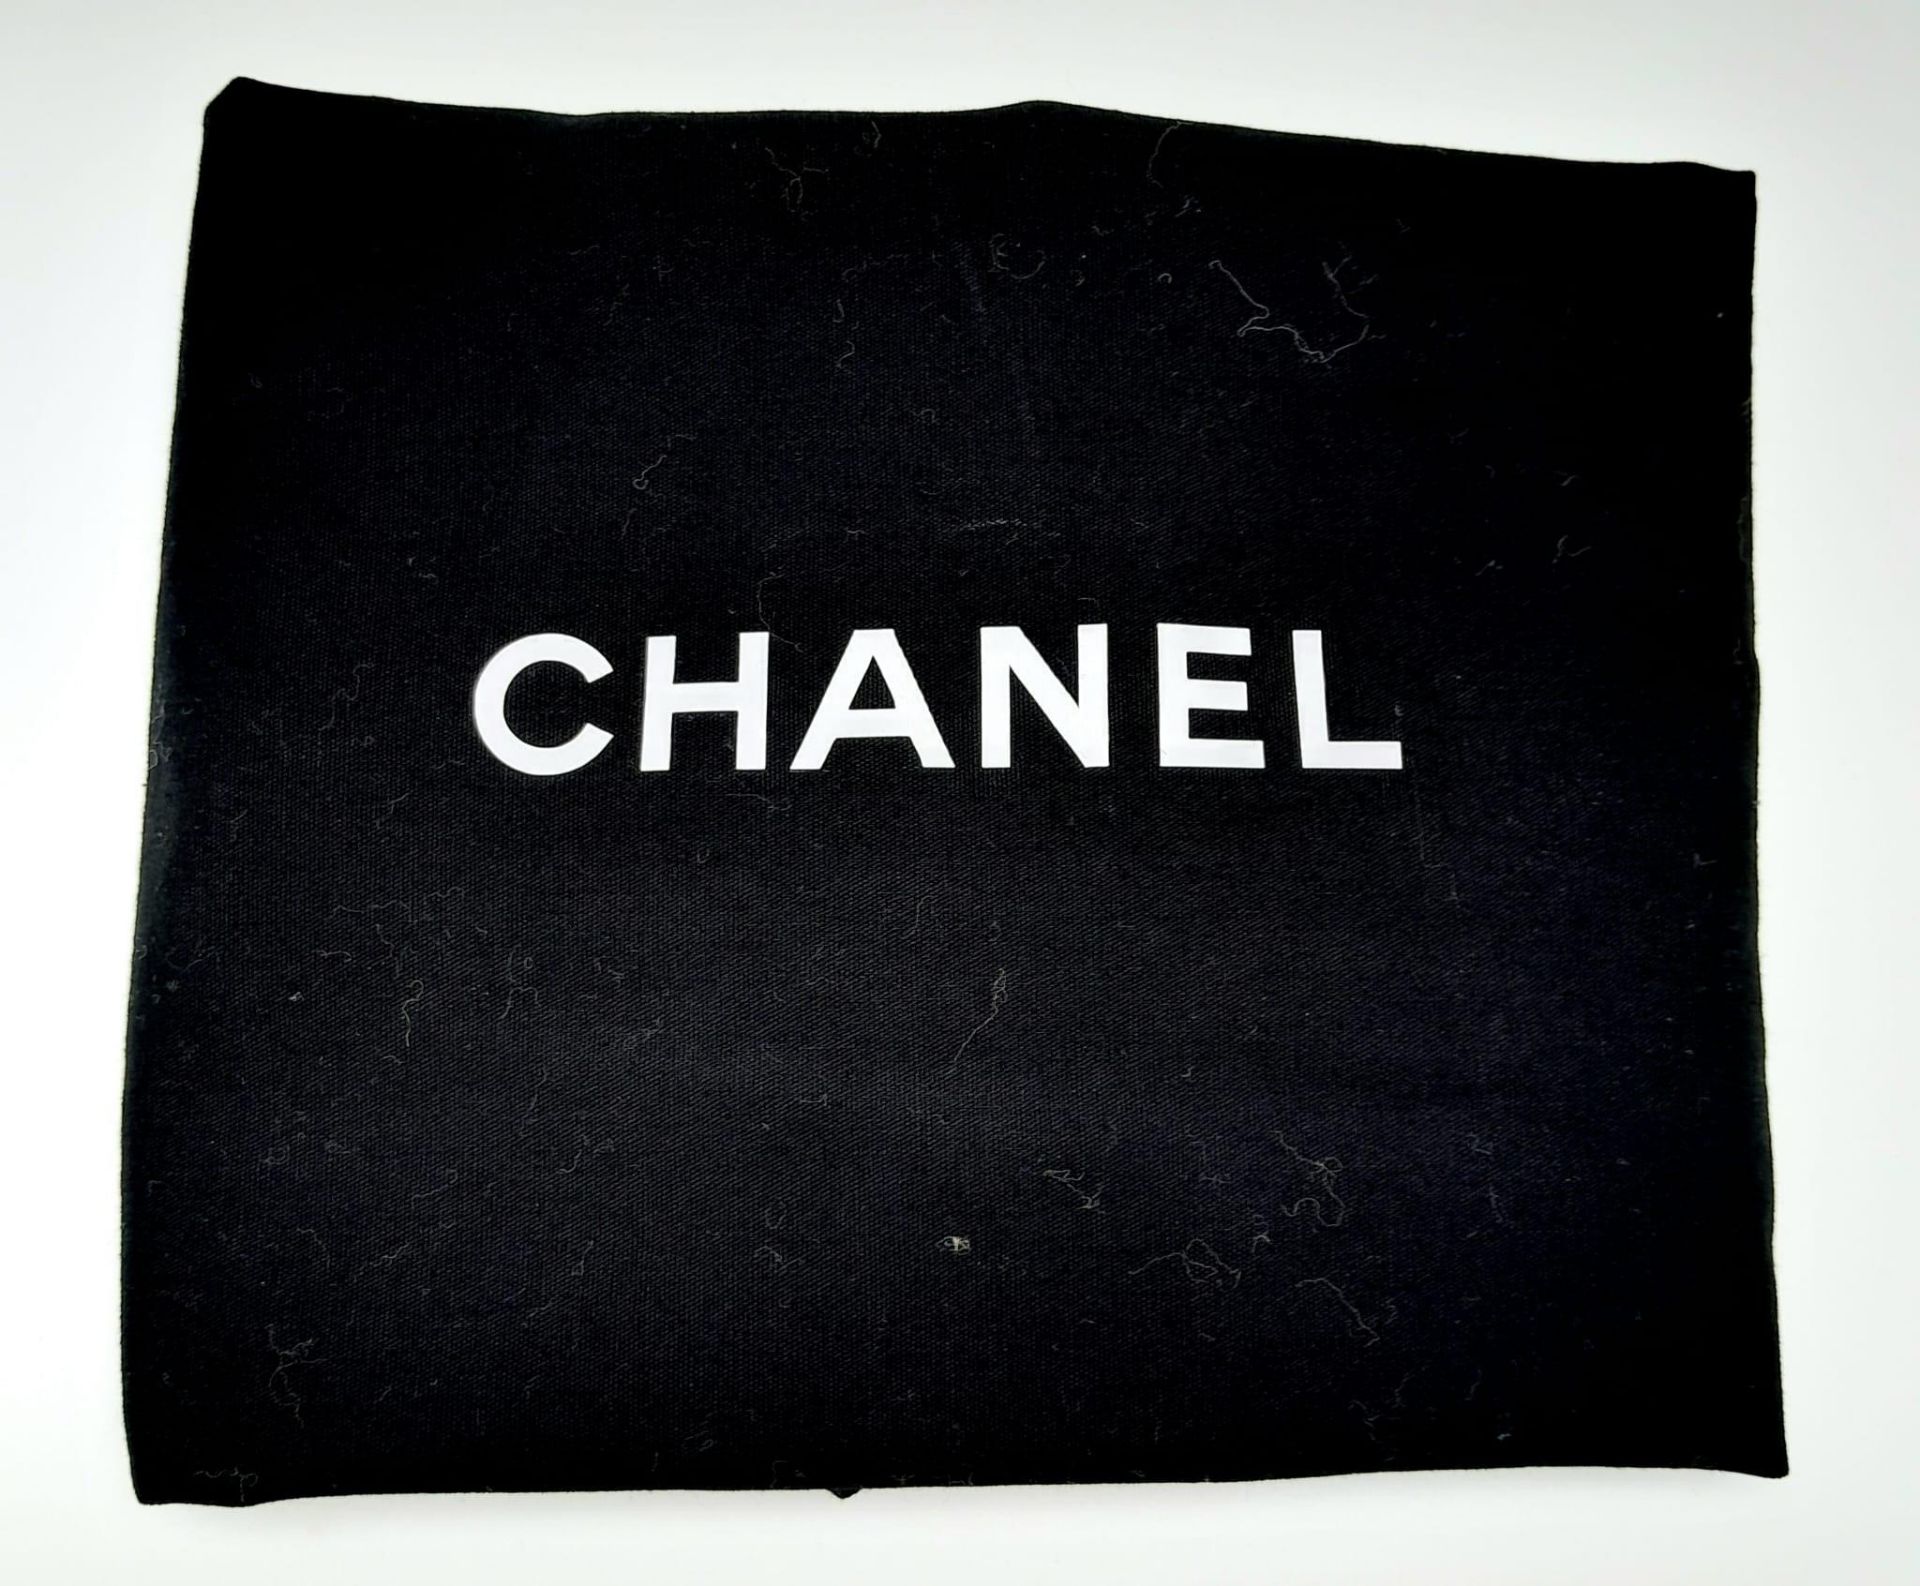 A Chanel Black Leather Boy Bag. Chevron decorative soft black leather with an antique style/finish - Image 12 of 12